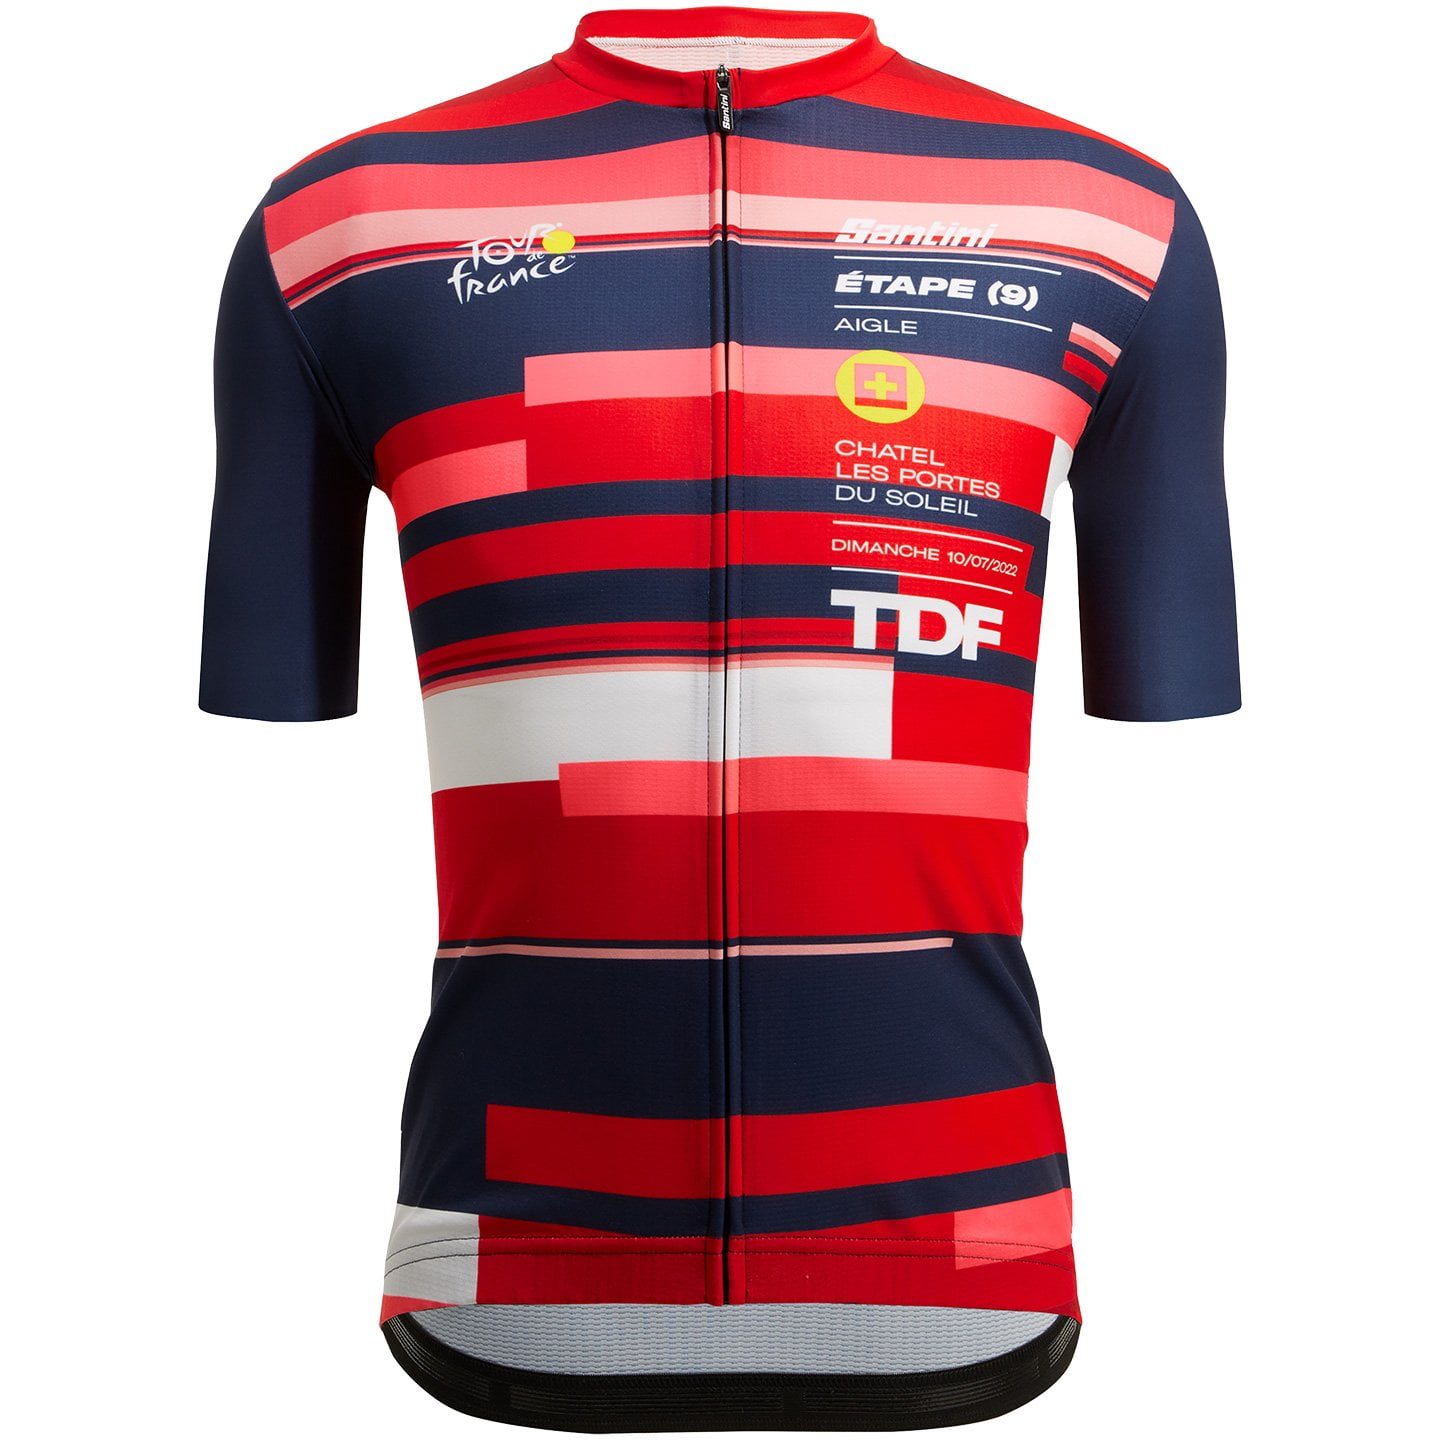 TOUR DE FRANCE Aigle-Chatel 2022 Short Sleeve Jersey, for men, size M, Cycle jersey, Cycling clothing